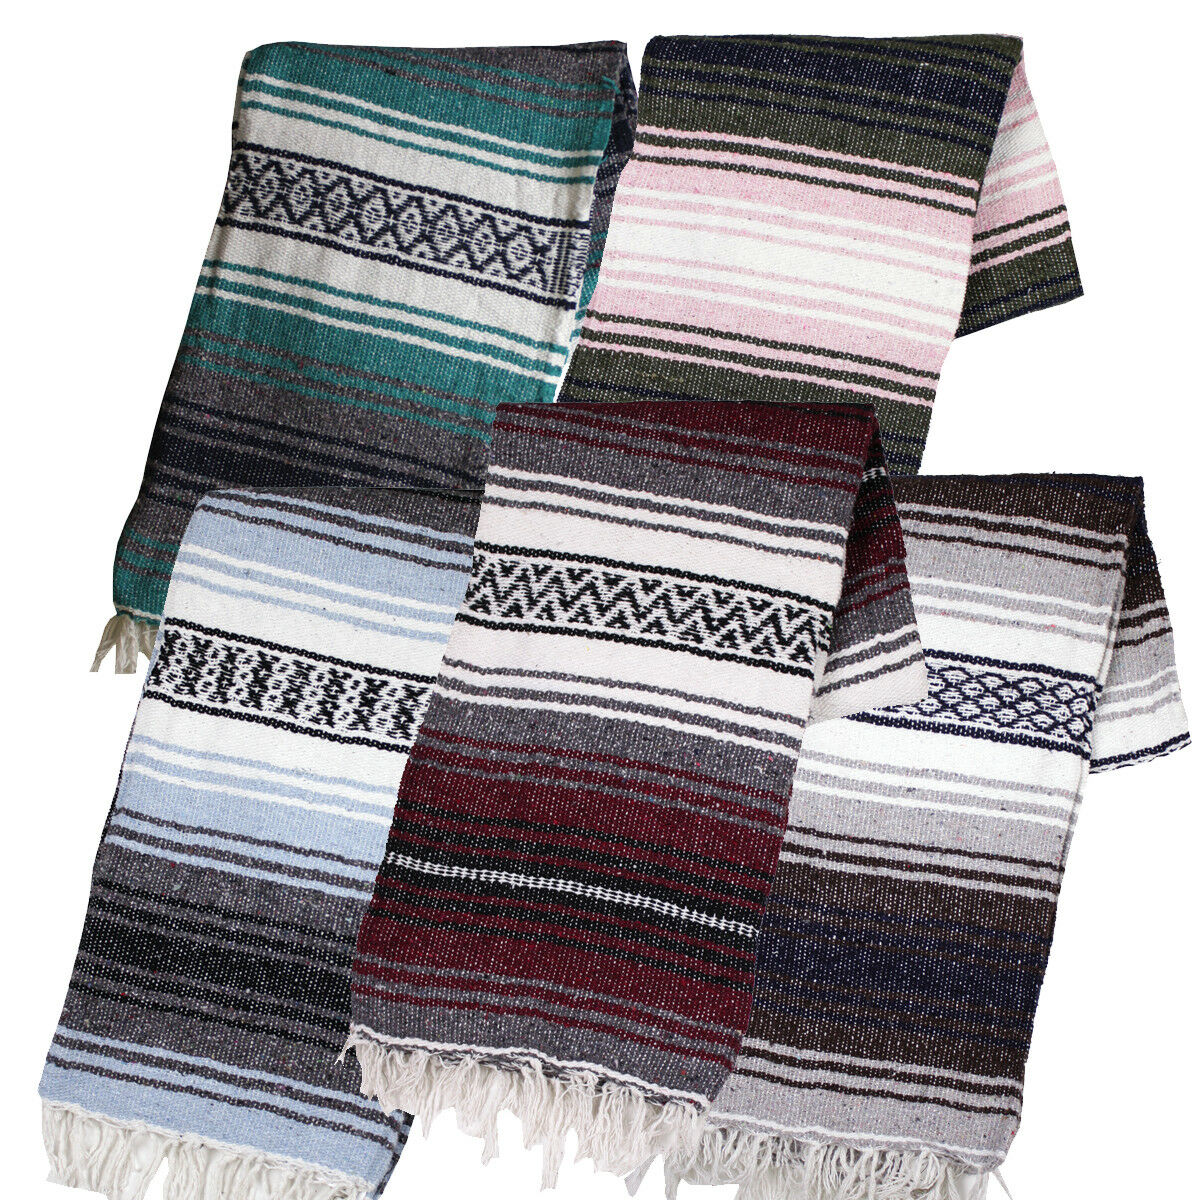 Two (2) Falsa Blankets - Authentic Mexican 74” X 50” Random Colors